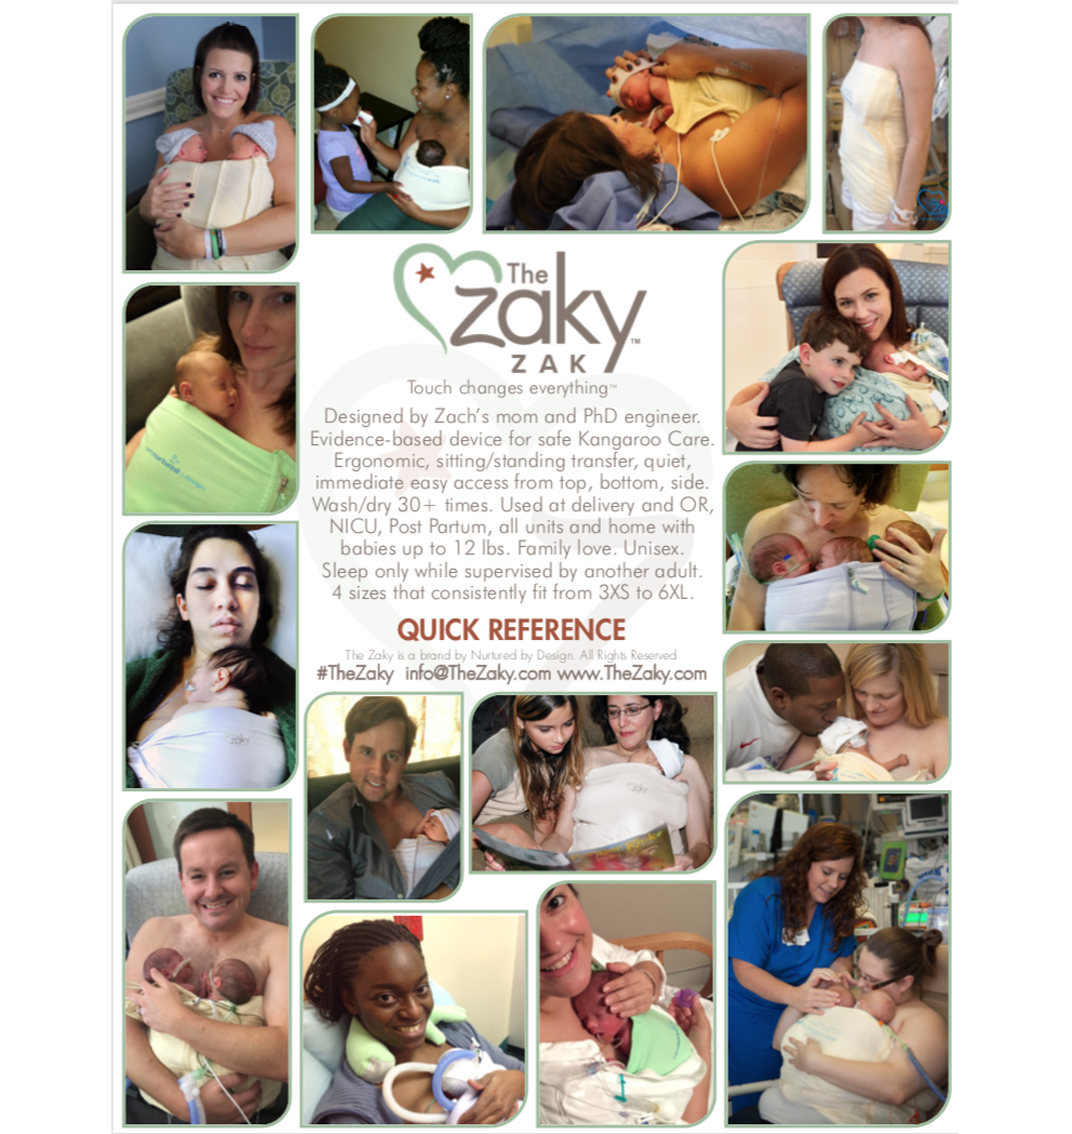 Fundraiser by and for Baptist South NICU in Jacksonville, Florida: The Zaky ZAK®